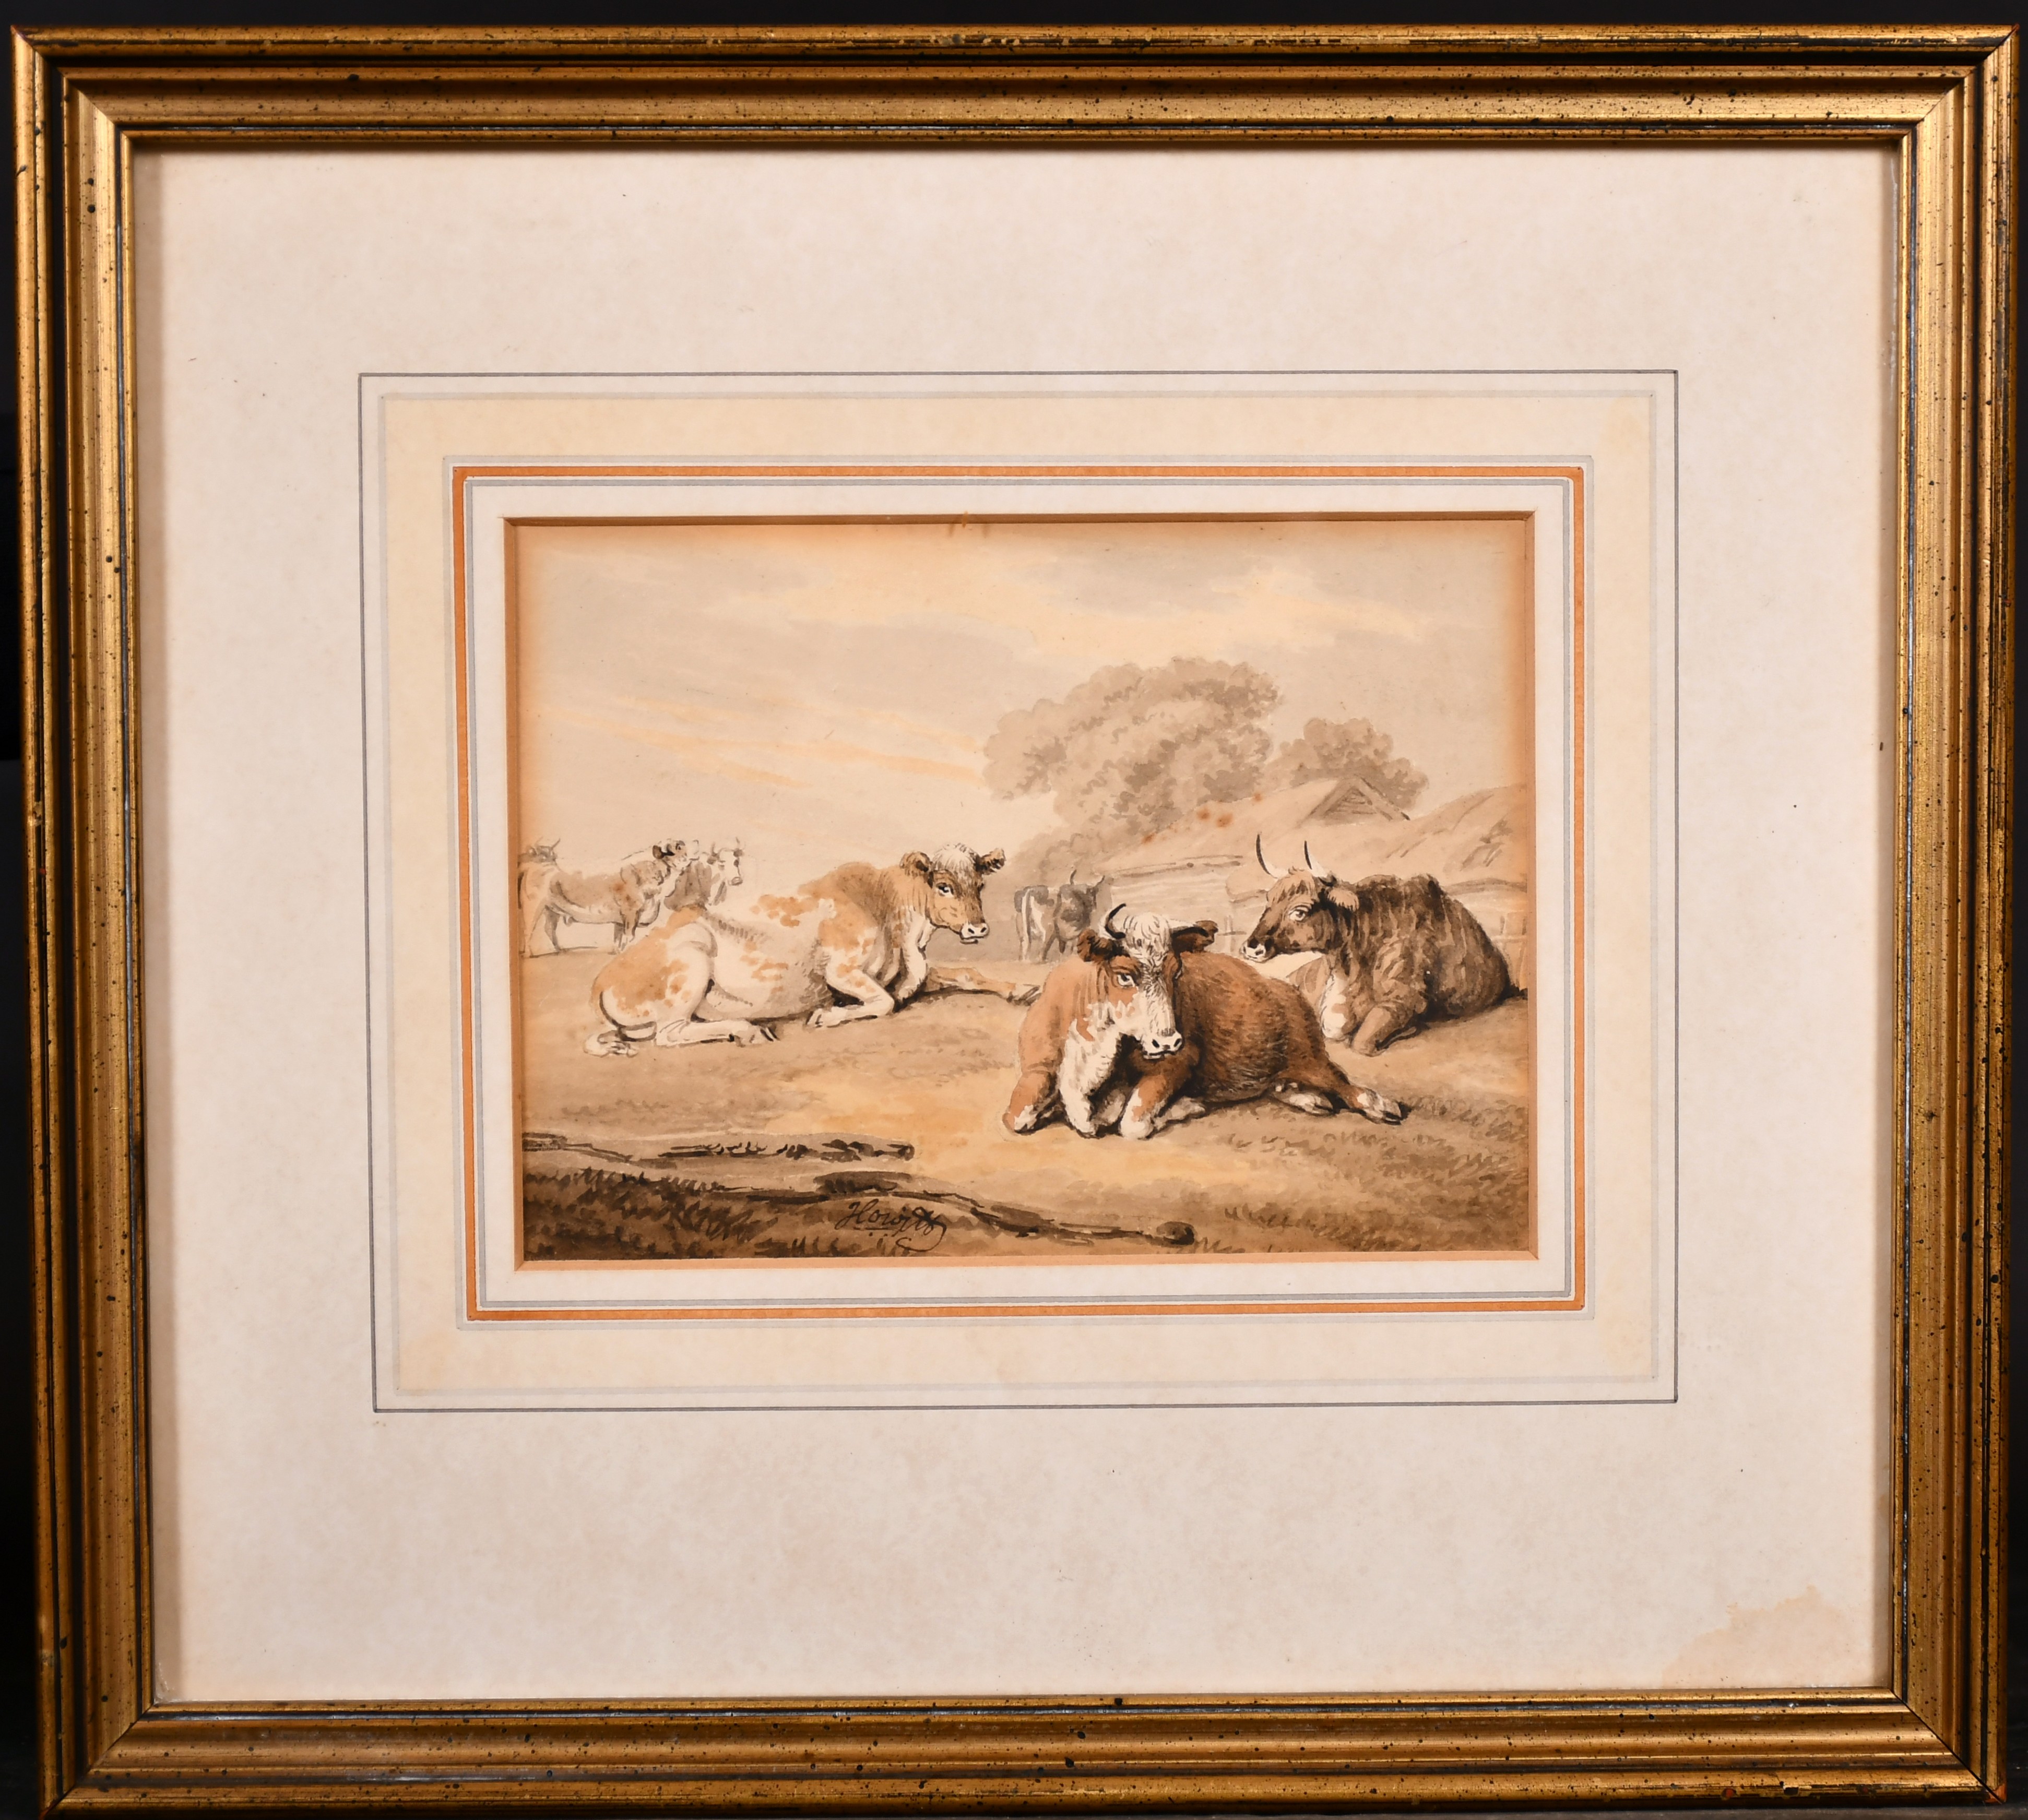 Samuel Howitt (c.1765-1822) British. Cattle Resting in a Field, Watercolour, Signed, and Inscribed - Image 2 of 5